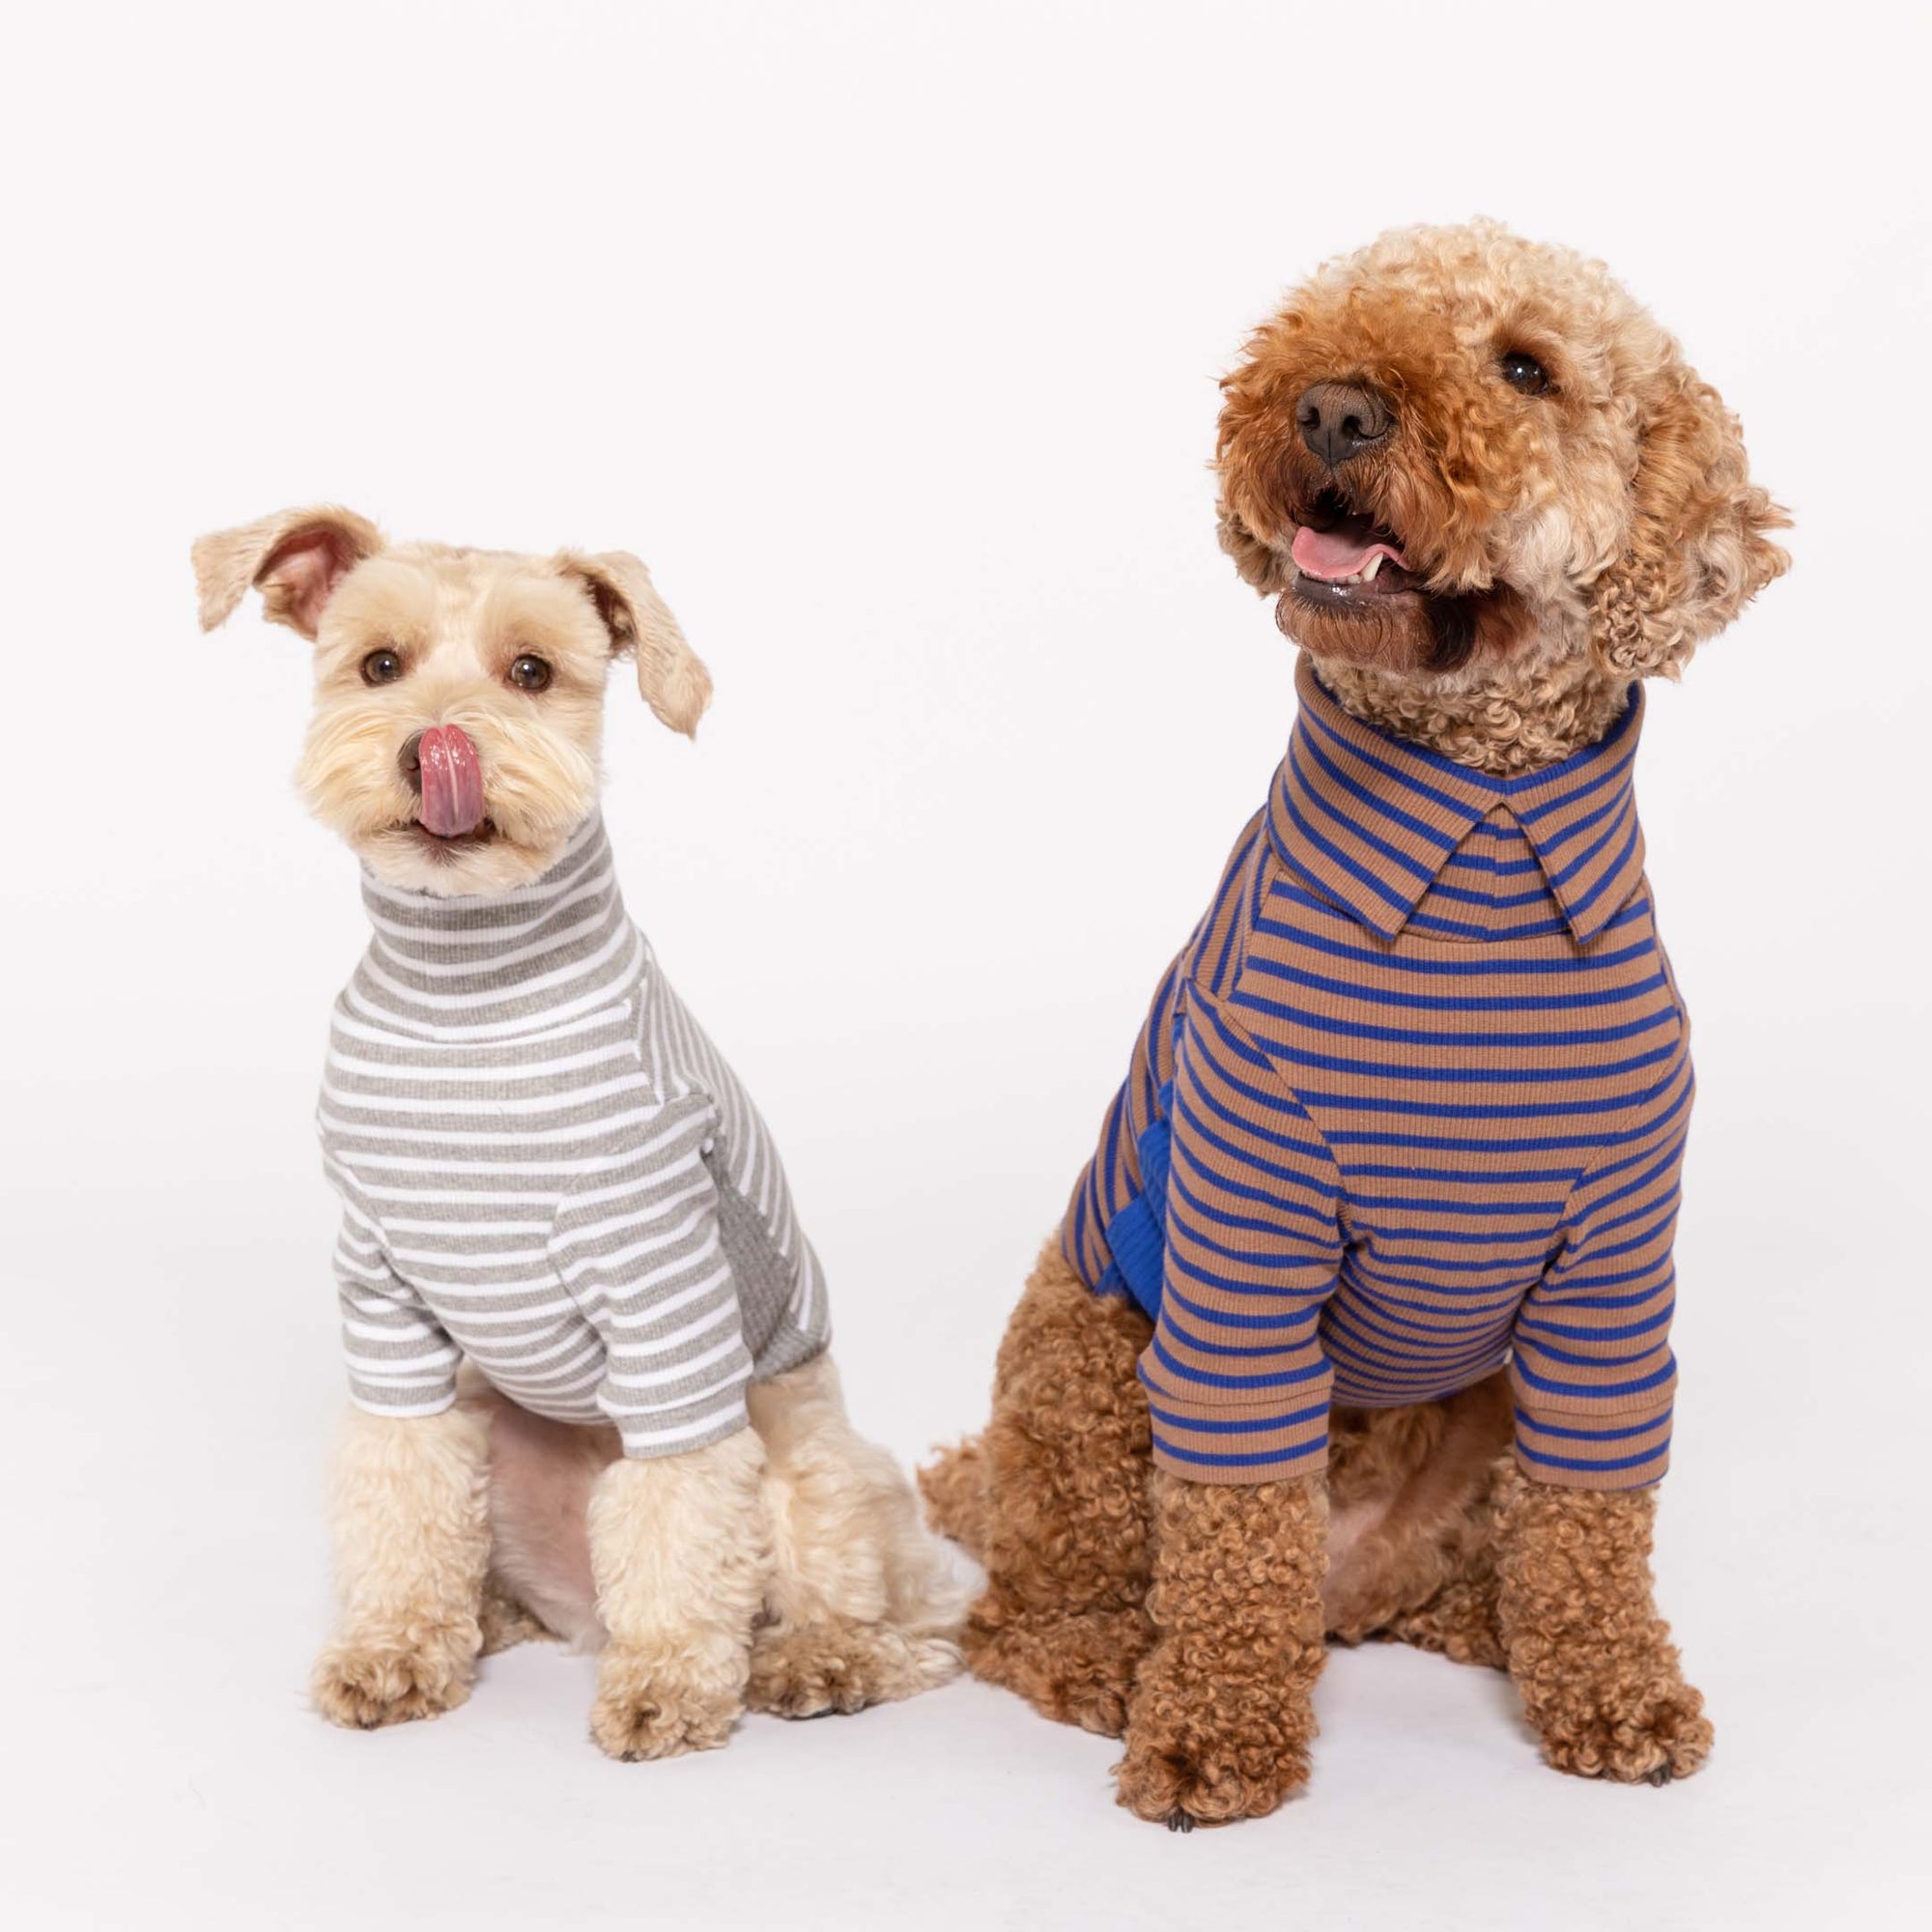  Two dogs against a white background: one is a light-coated terrier mix in a gray and white striped turtleneck sweater, tongue out, and the other is a curly-coated brown poodle mix in a cobalt and brown striped turtleneck sweater, smiling.